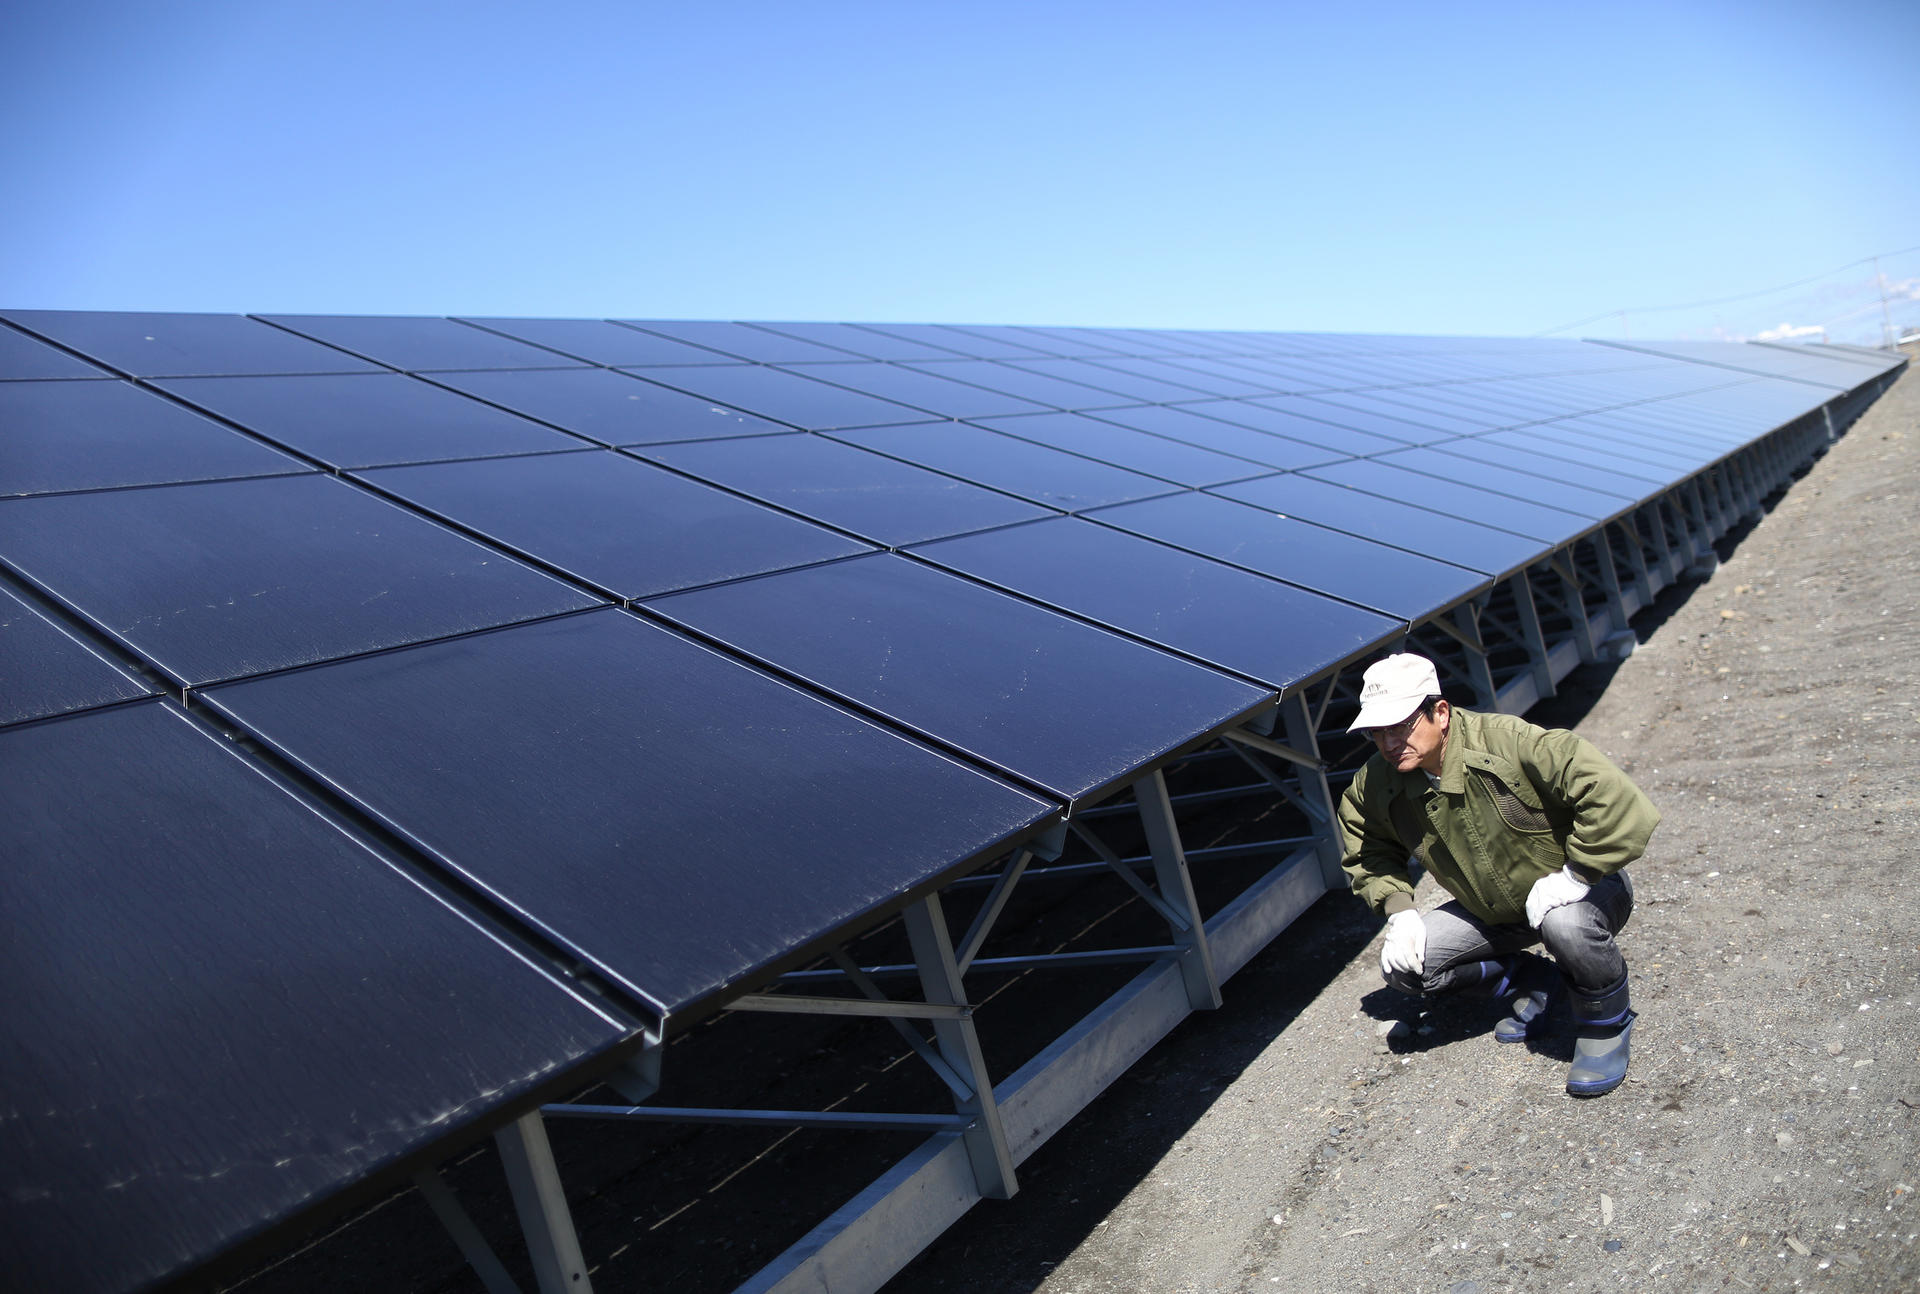 Japan may add the most solar power capacity in the world this year as a two-year-old incentive programme attracted investors including Goldman Sachs. Photo: Bloomberg